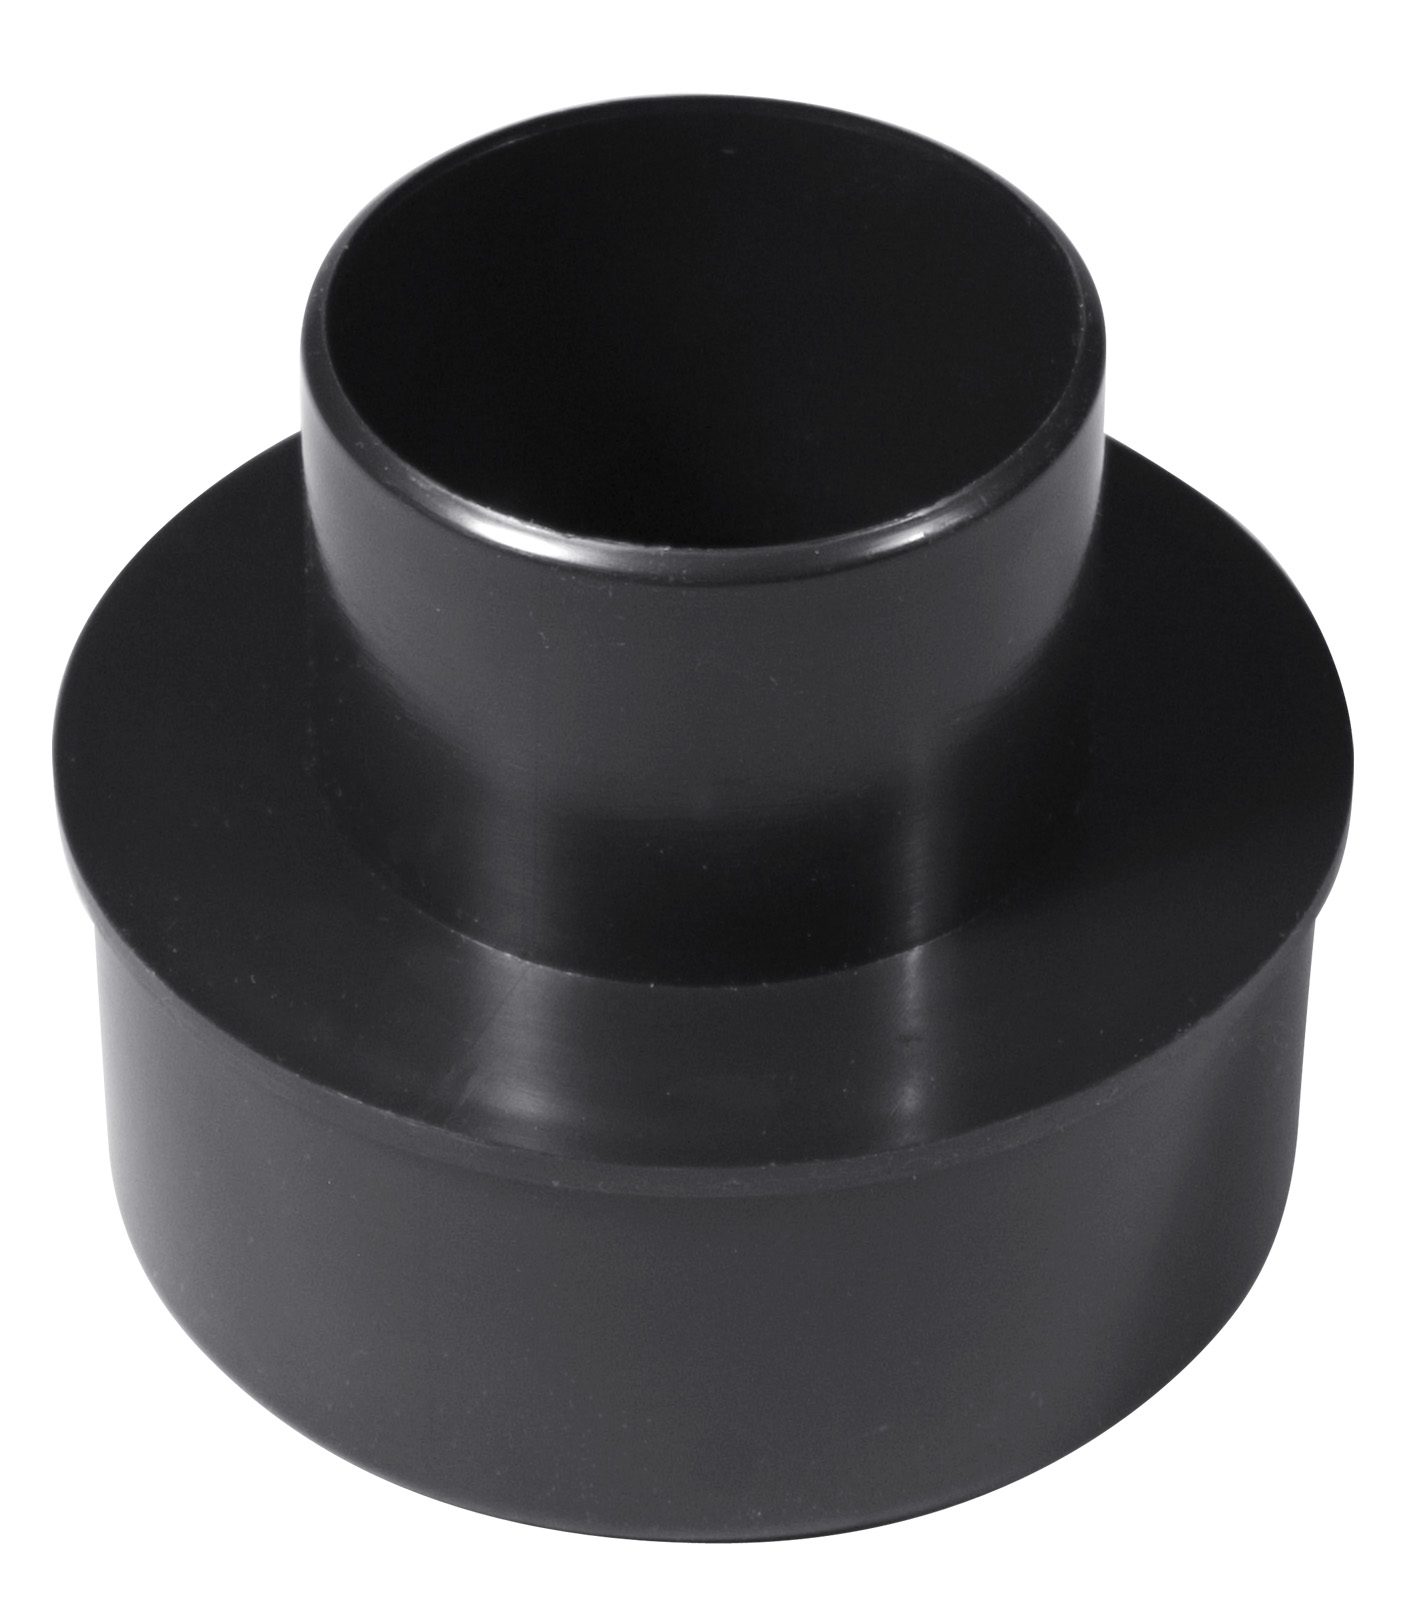 Powertec 70104 4-Inch to 2-1/4-Inch Reducer